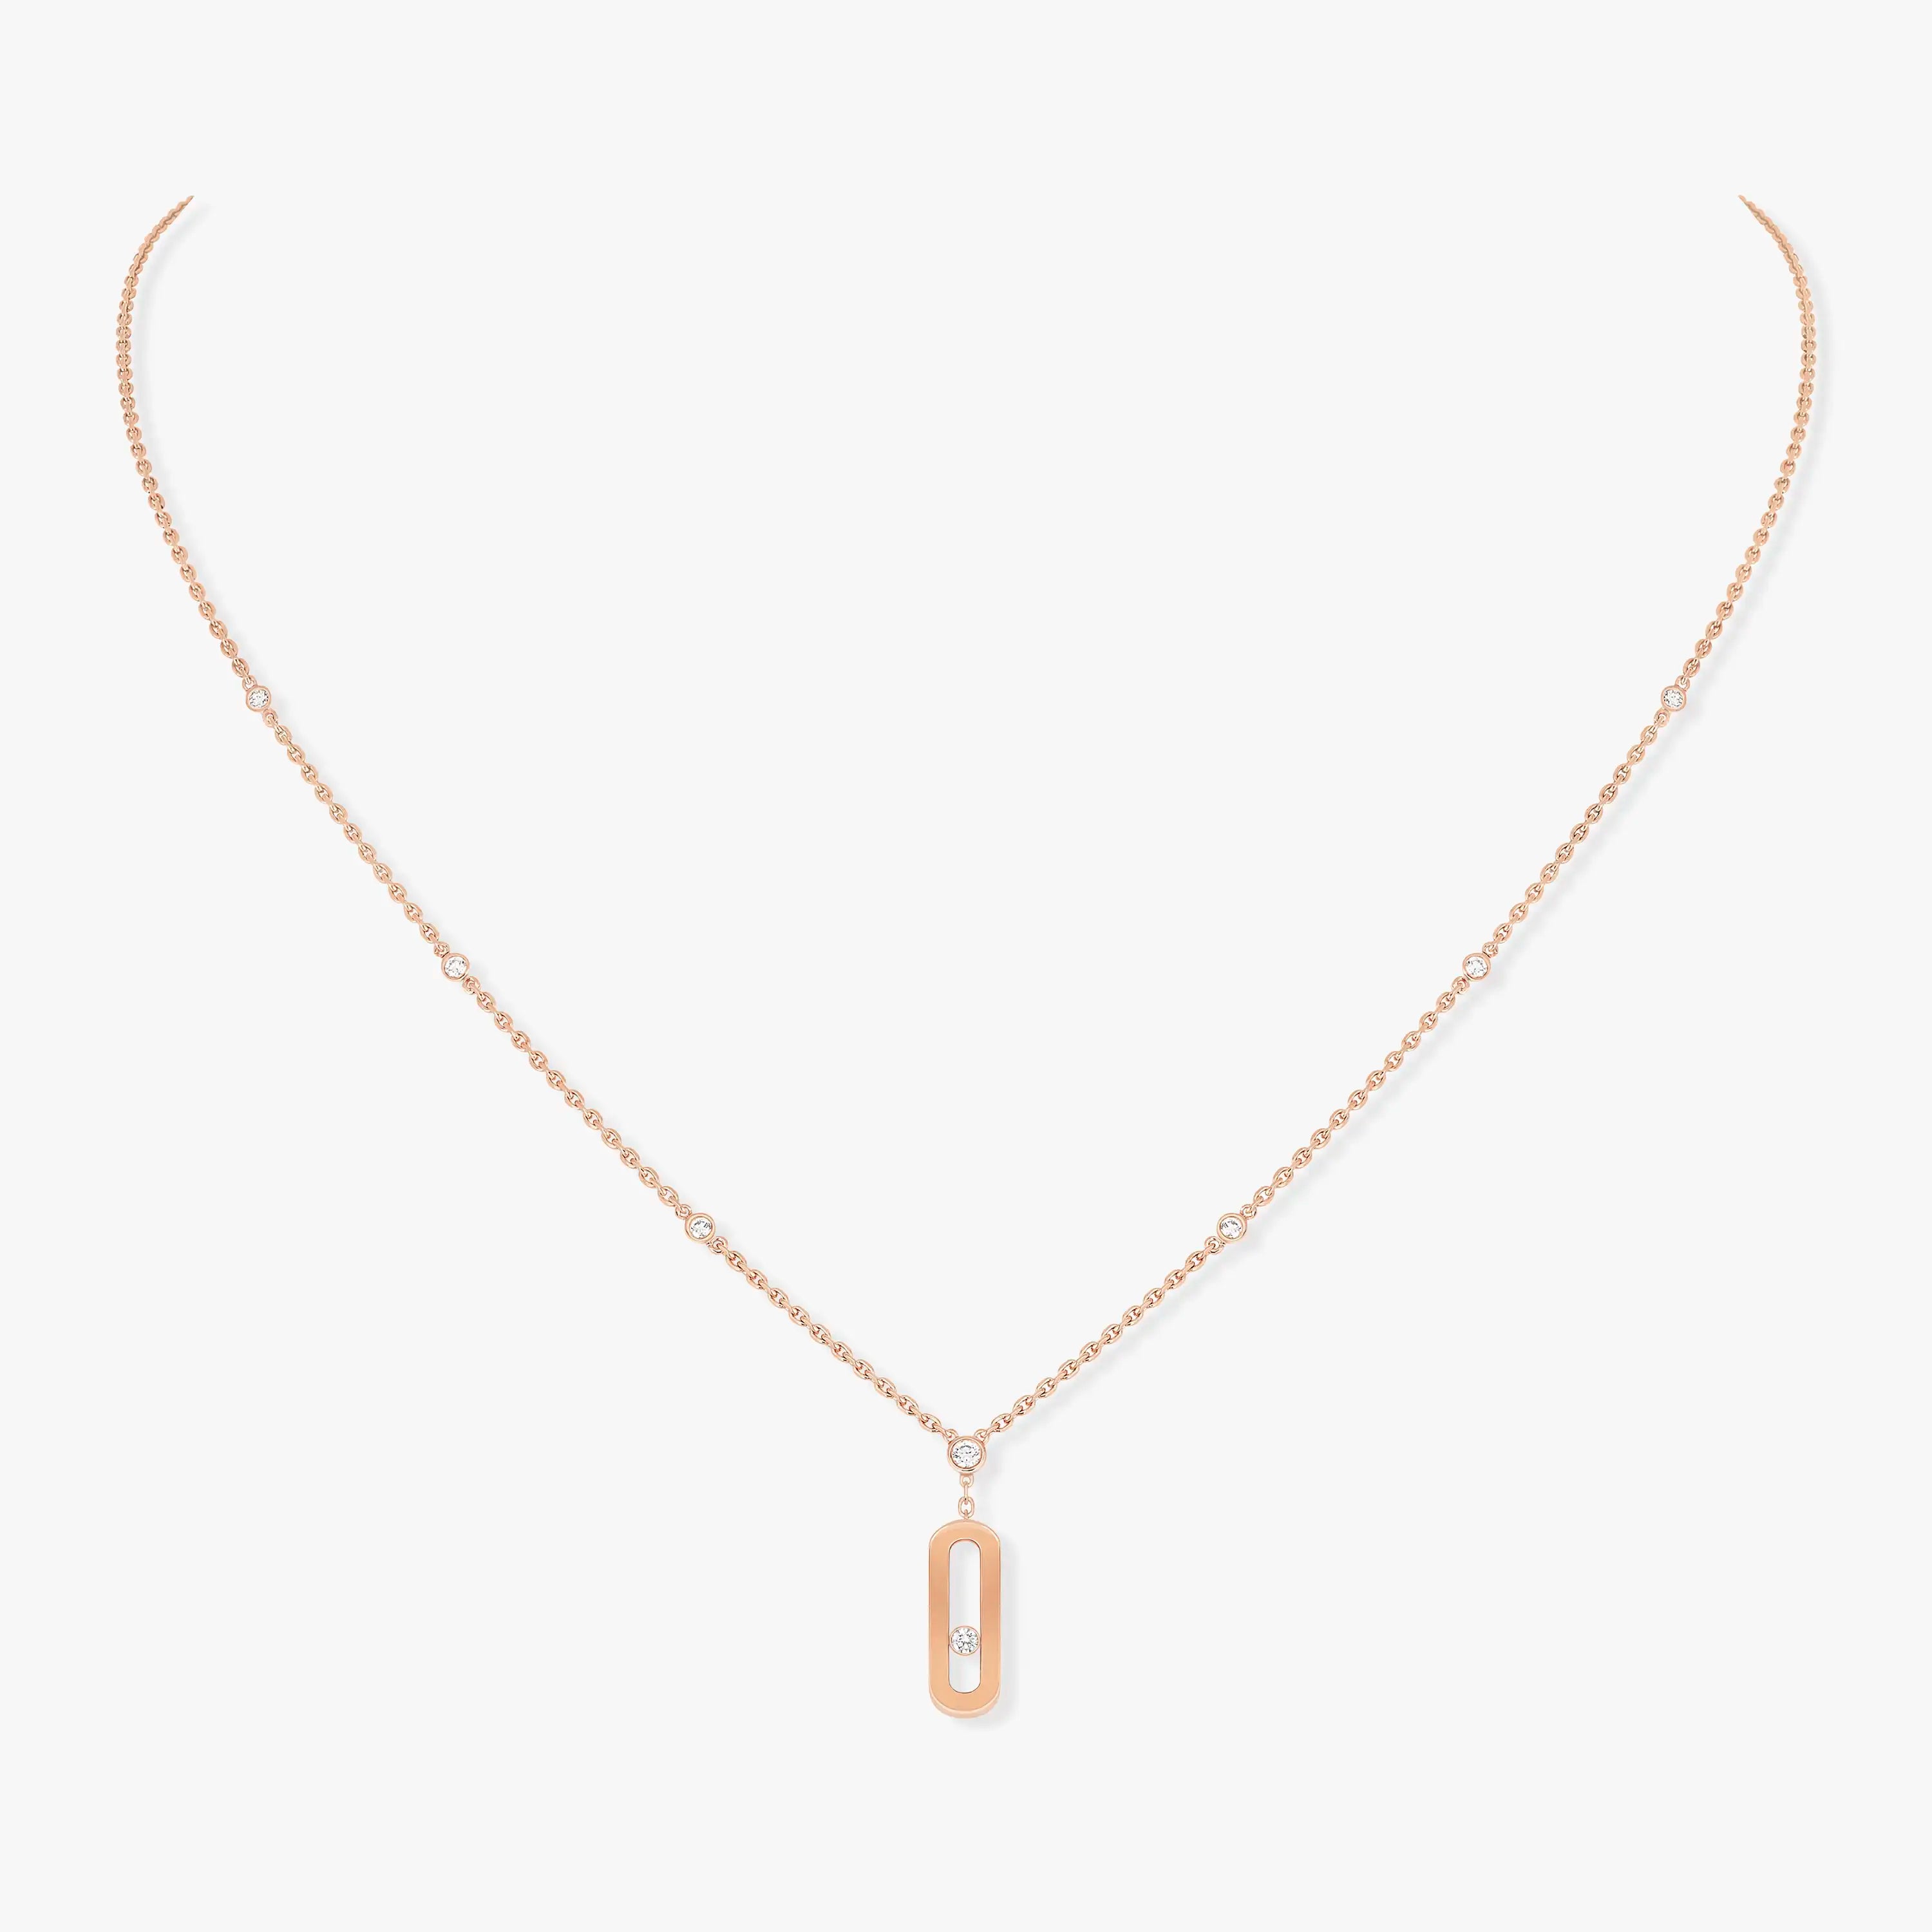 MESSIKA PINK GOLD DIAMOND NECKLACE MOVE UNO LONG NECKLACE 10111-PG